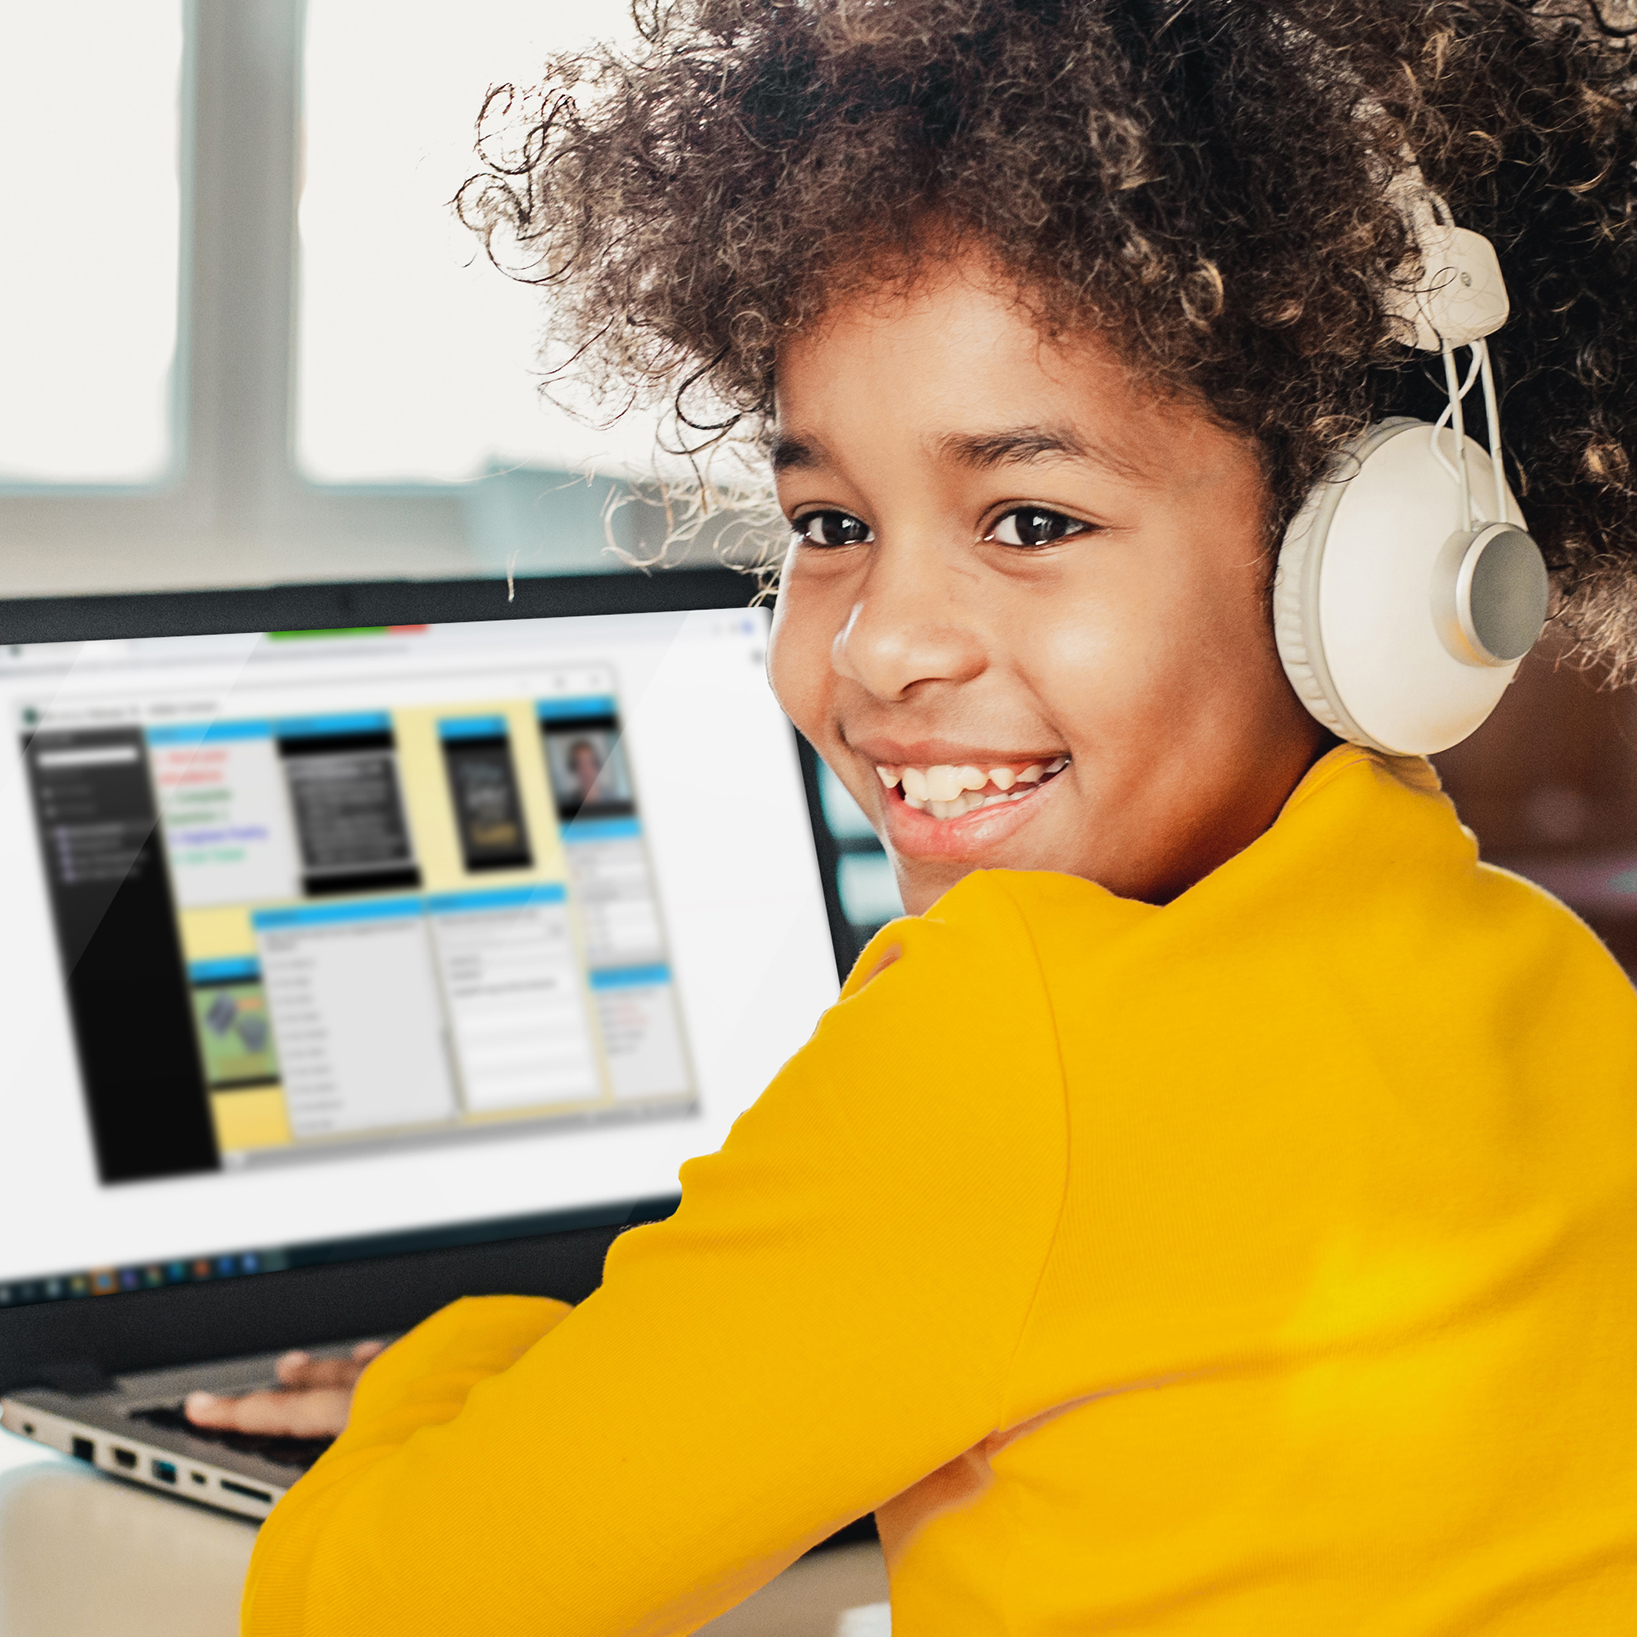 A young girl is smiling while listening to an online lesson